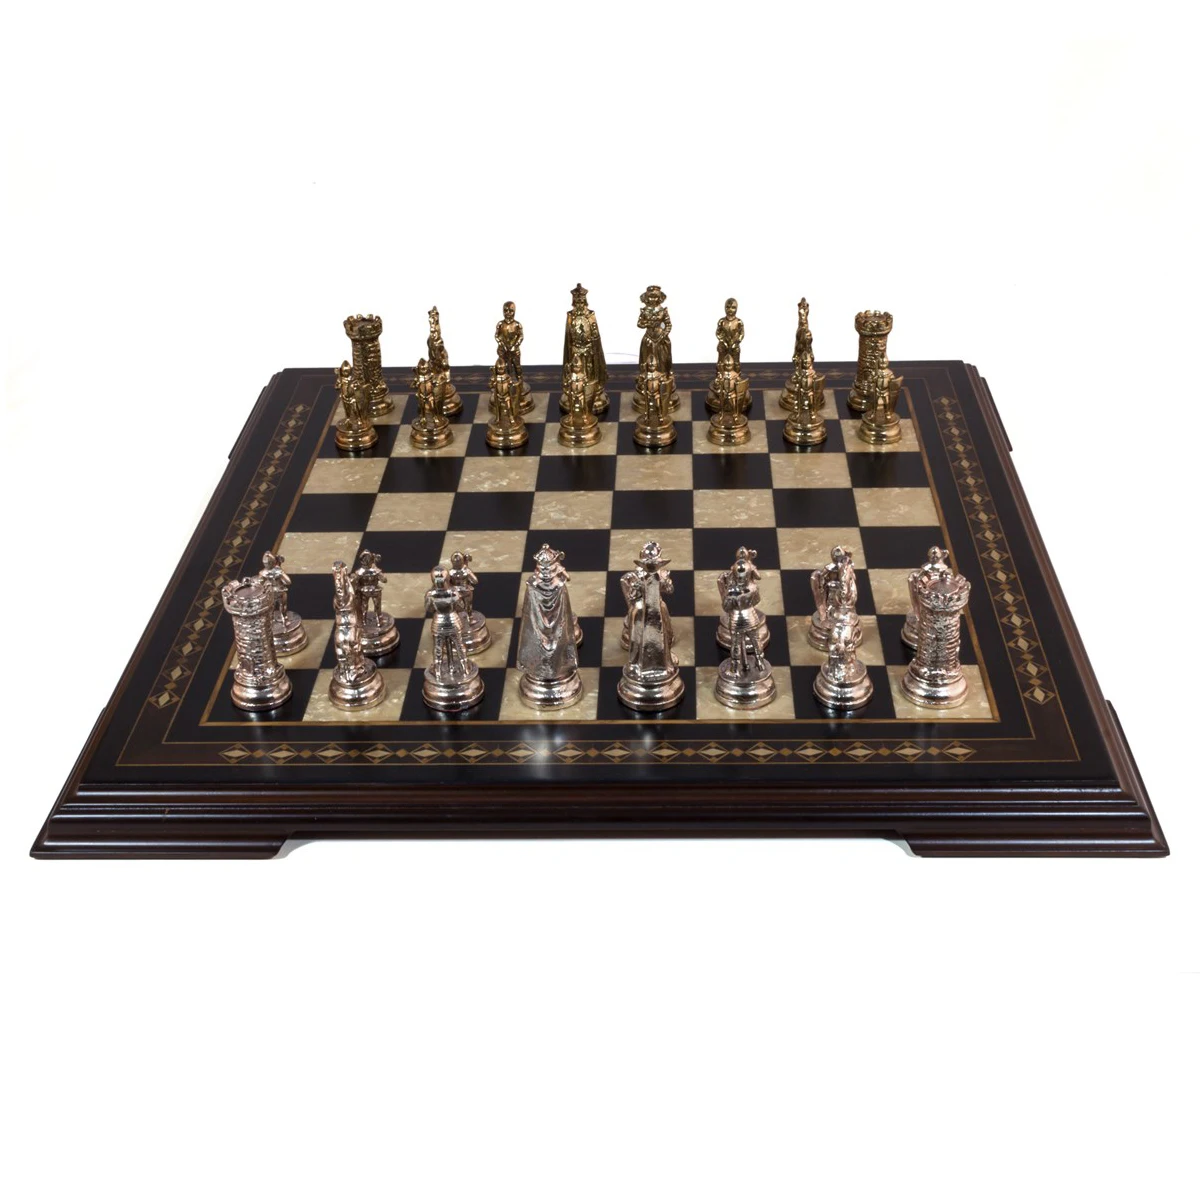 22.5'' Flat Footed Black Chessboard - Solid Beech Wood Mosaic Engraved Chess Board Game Gift Items Deck Box Checkers Шахматы осада или шахматы со смертью роман